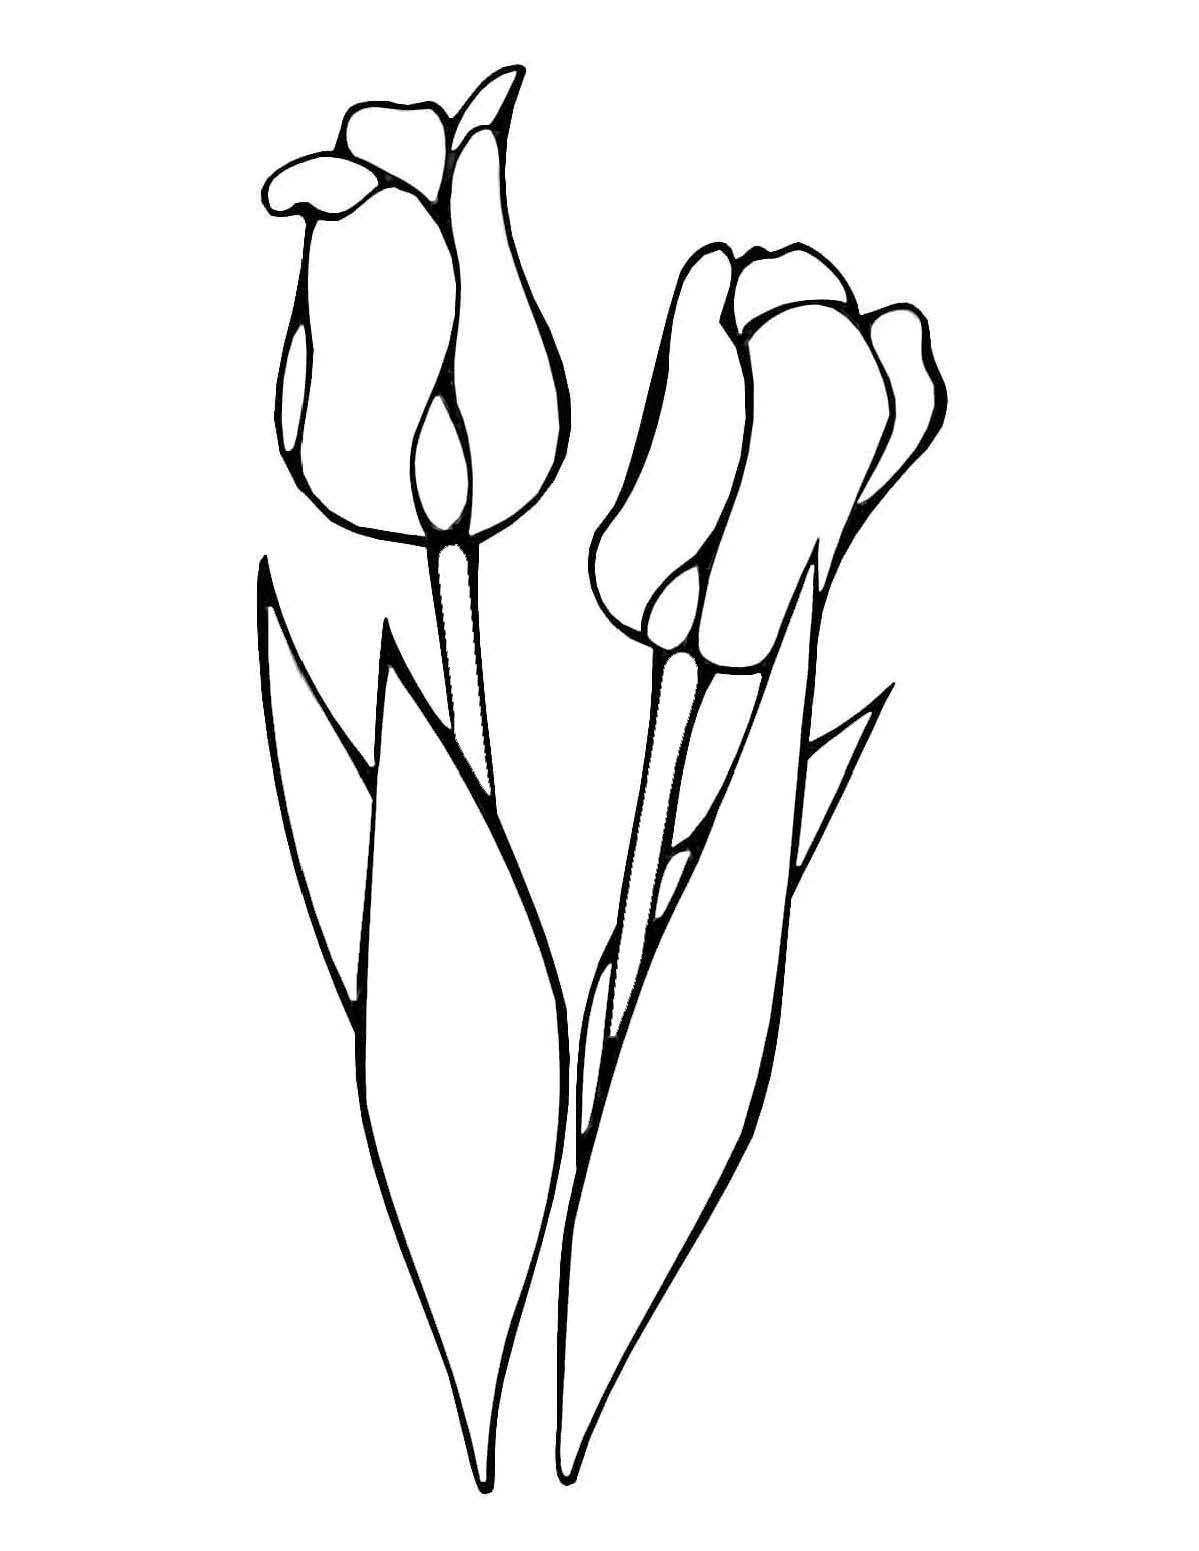 Tulip Coloring Activity for Elderly Adults with Dementia and Alzheimer's